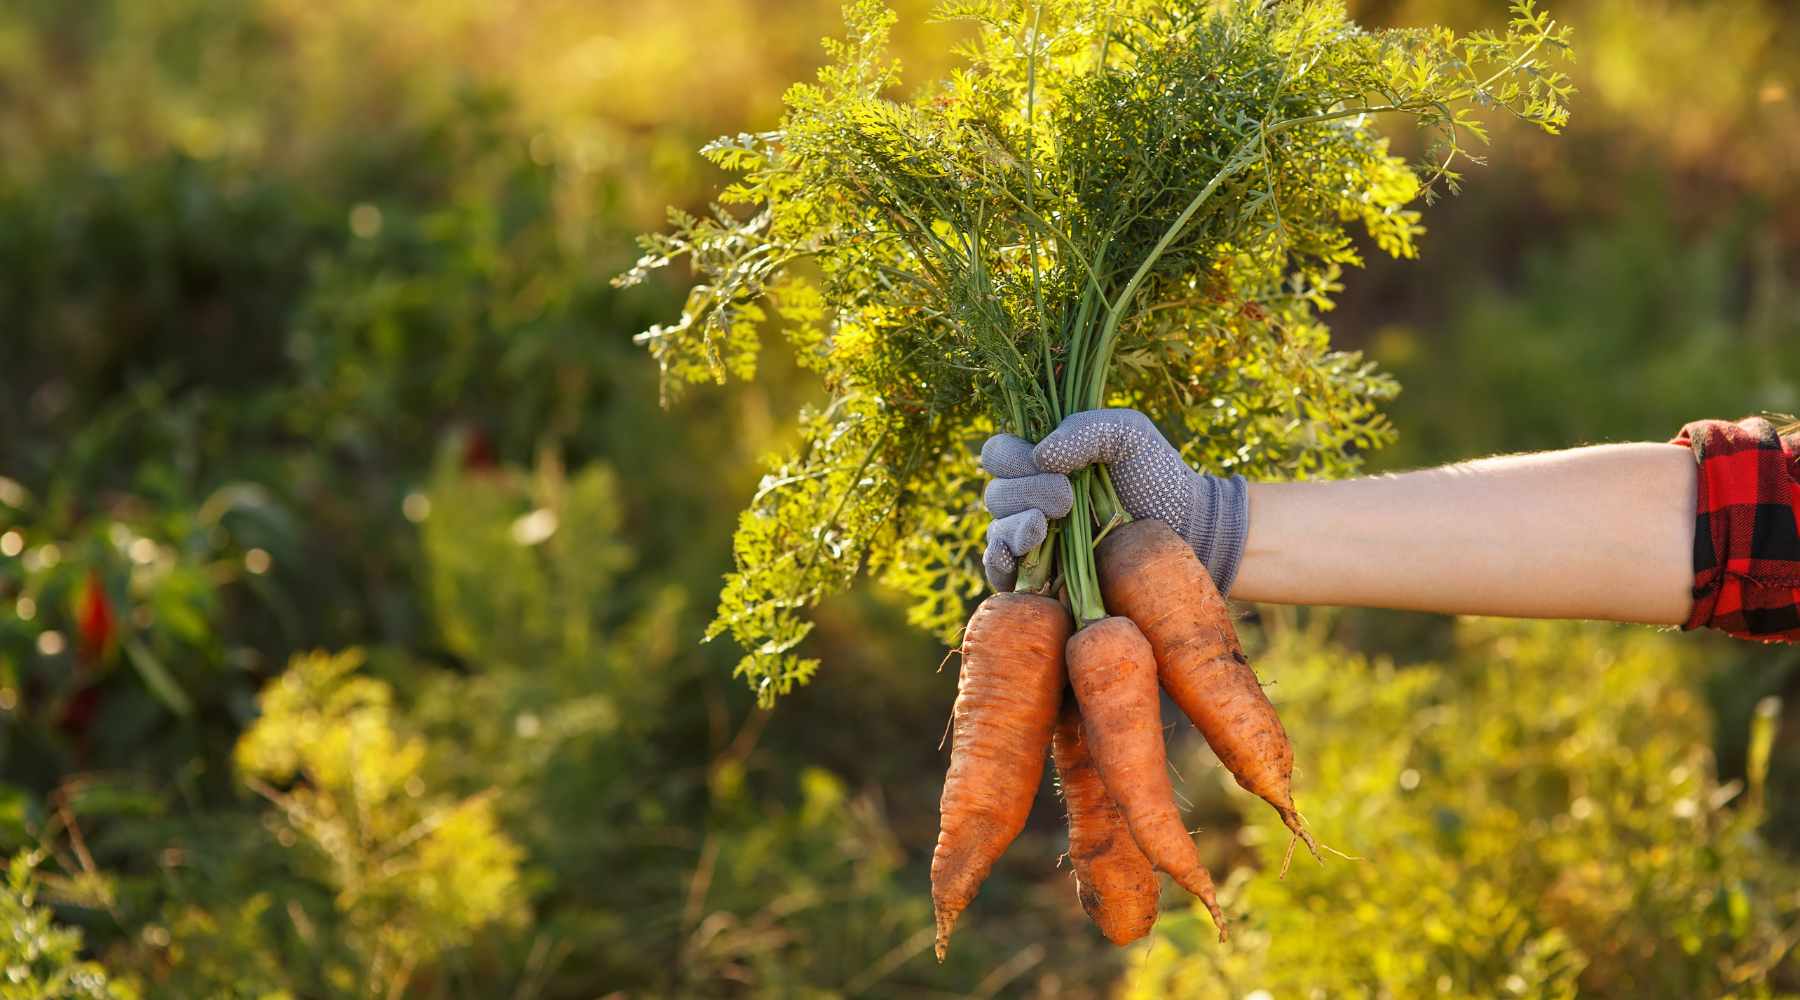 arm holding out harvested carrots with a lush field in the background.